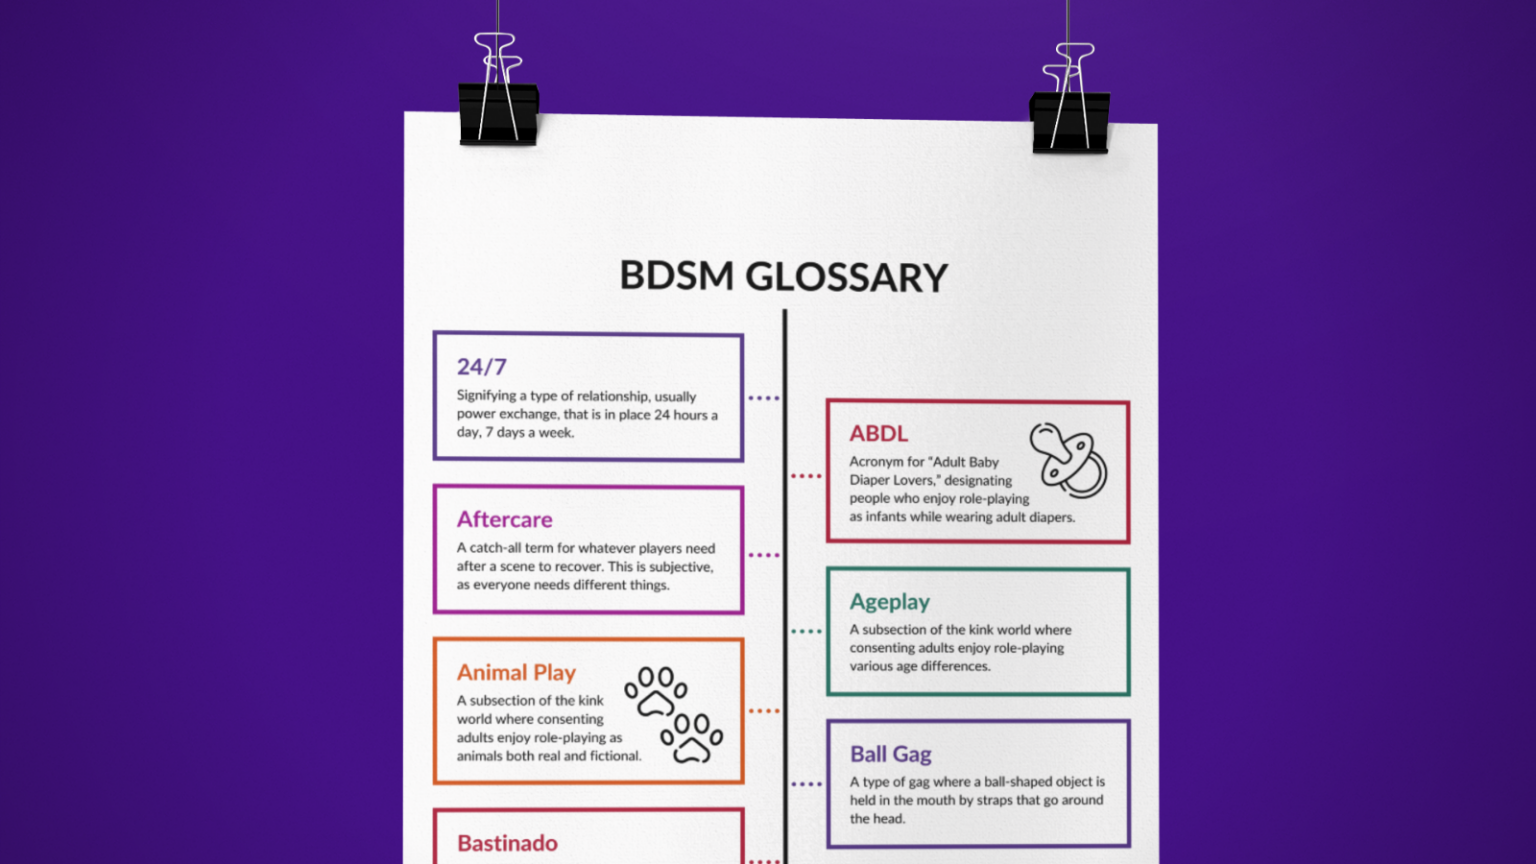 A mockup of a piece of paper with the title BDSM Glossary, followed by various icons and definitions of BDSM related terms